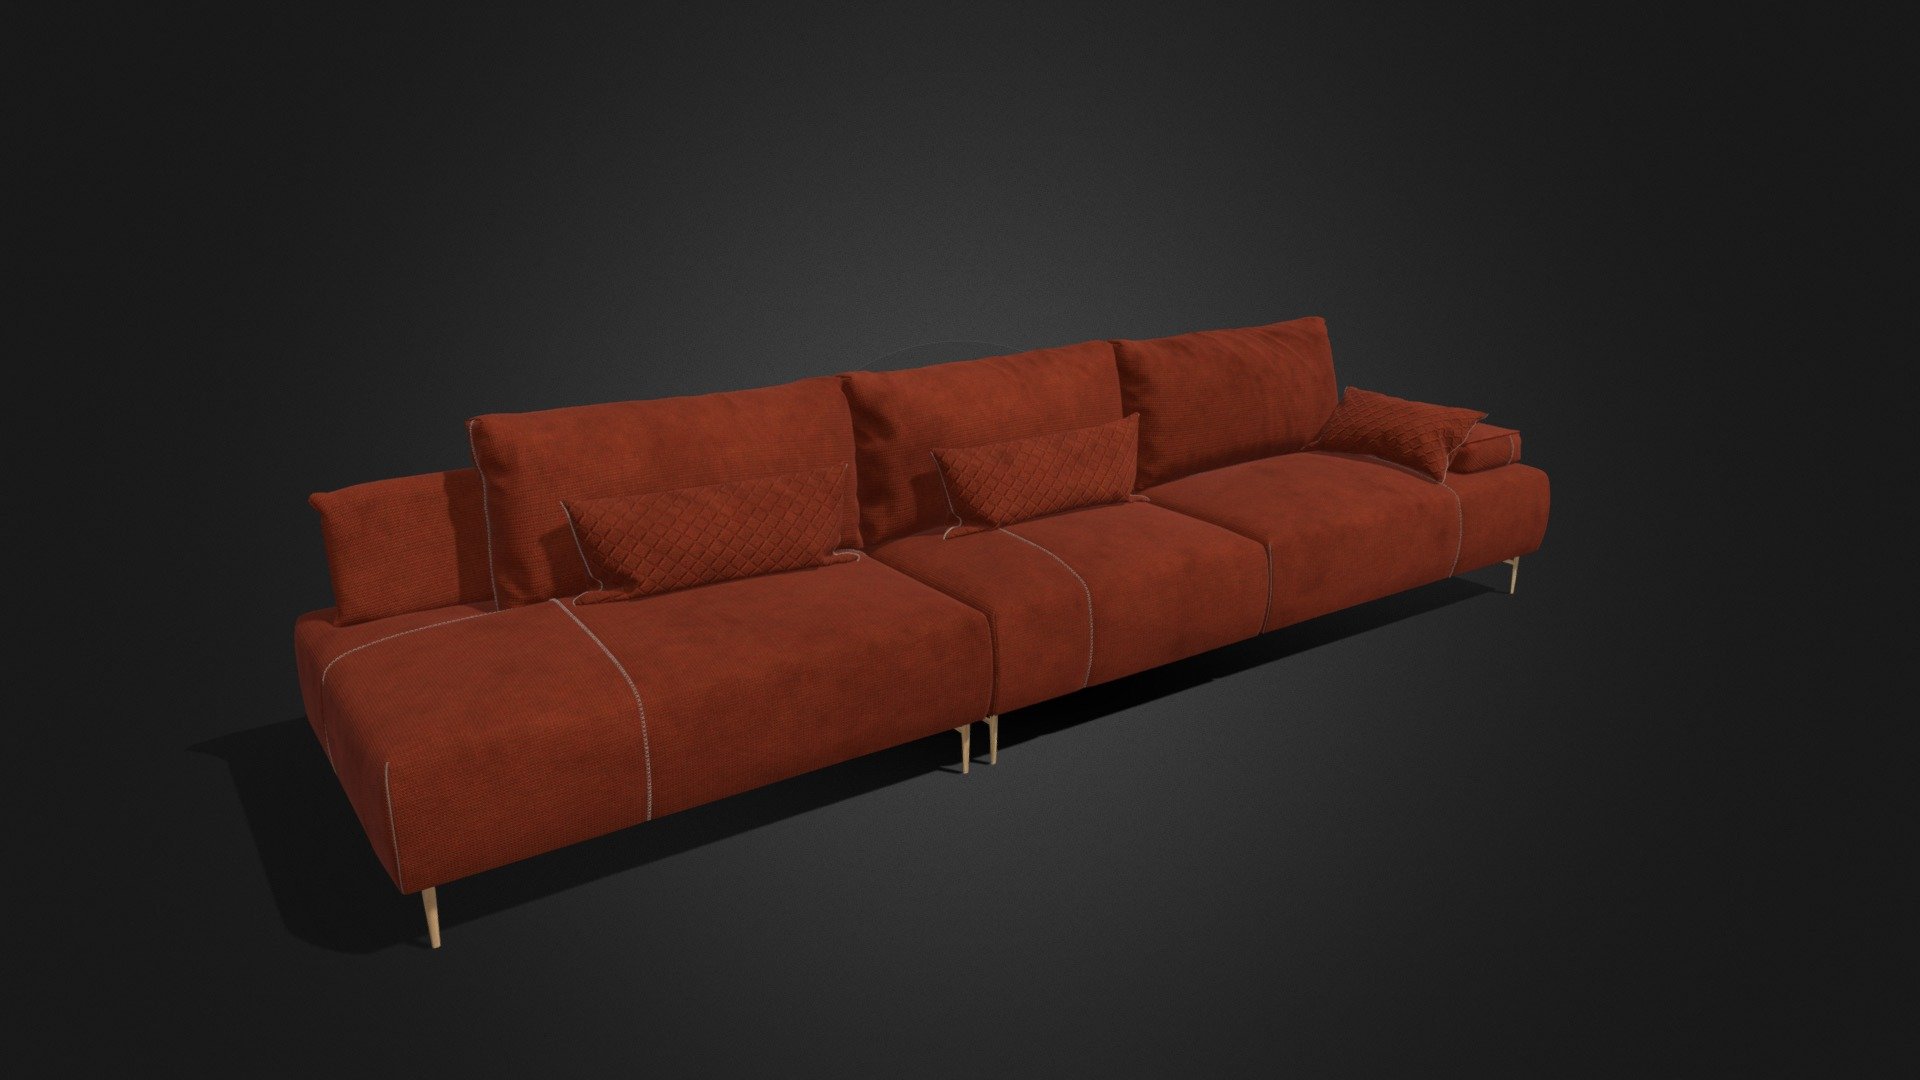 3d model of a Sofa Saks. (PBR texture )

This product is made in Blender and ready to render in Cycle. Unit setup is metres and the models are scaled to match real life objects. 

The model comes with textures and materials and is positioned in the center of the coordinates system.


No additional plugin is needed to open the model.




Notes:



Geometry: Polygonal

Textures: Yes 

Rigged: No

Animated: No

UV Mapped: Yes

Unwrapped UVs: Yes, non-overlapping


Bake normal map




Note: don't forget to take a few seconds to rate this product, your support will allow me to continue working .
Thanks in advance for your help and happy blending!




Hope you like it! Thank you!



My youtube channel : https://www.youtube.com/toss90 - Sofa SAKS - Buy Royalty Free 3D model by Toss90 3d model